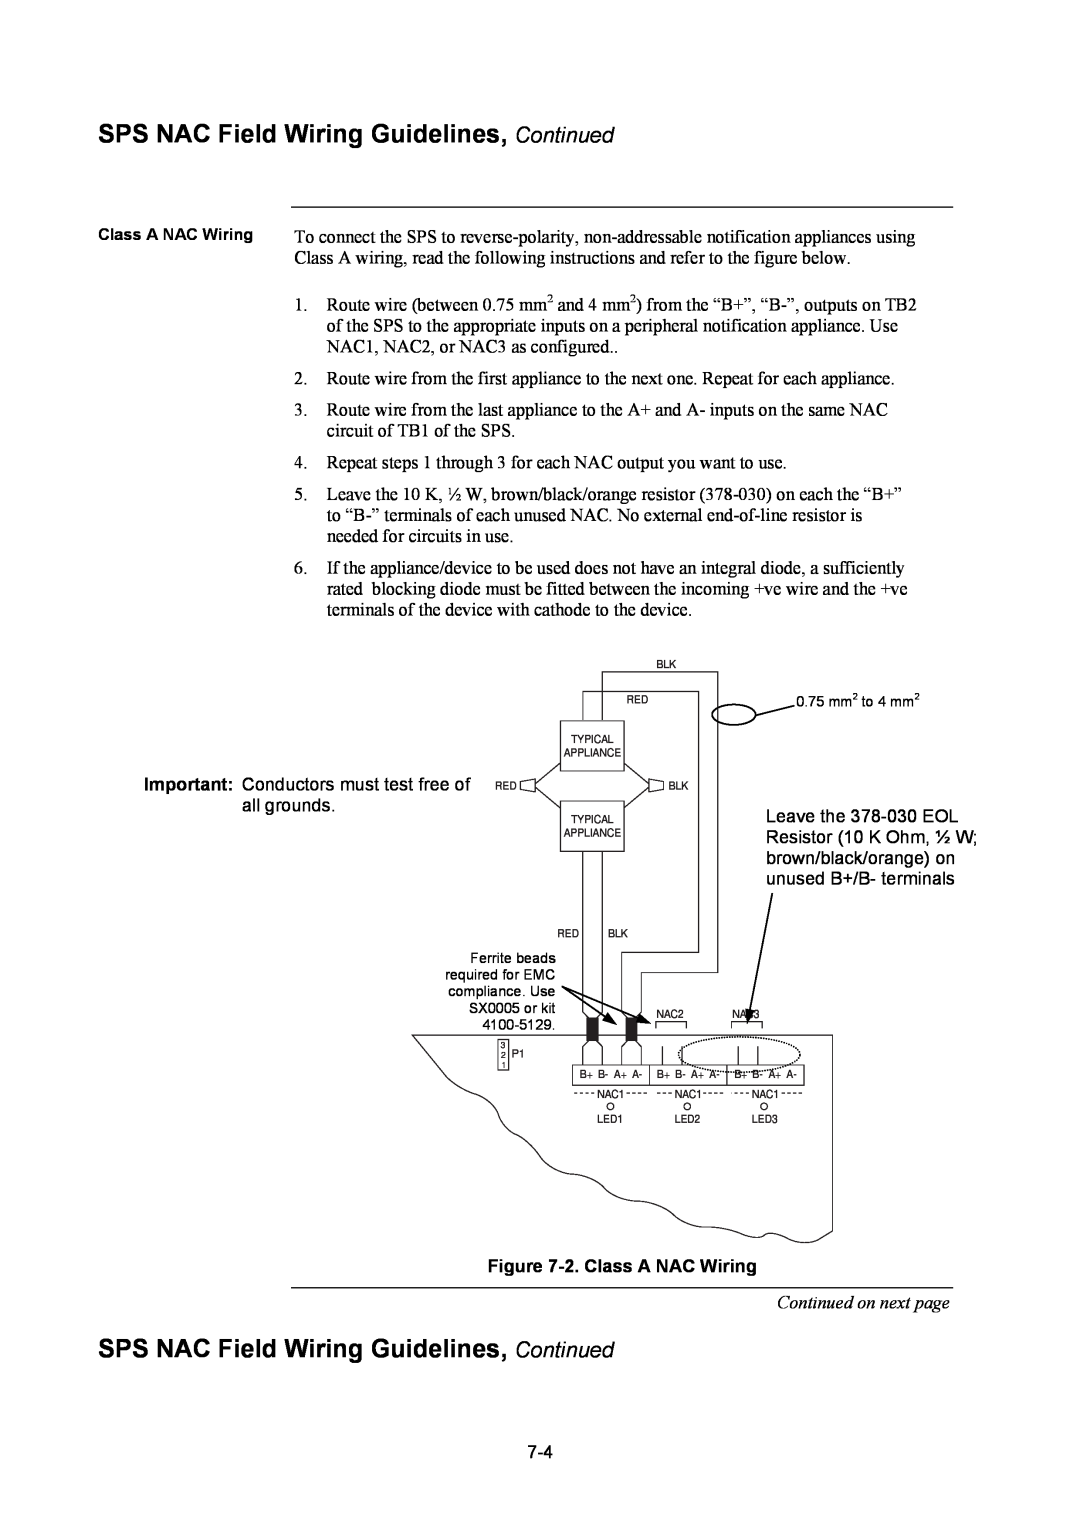 Tyco 4100U installation manual SPS NAC Field Wiring Guidelines, Continued, 2.Class A NAC Wiring, Continued on next page 